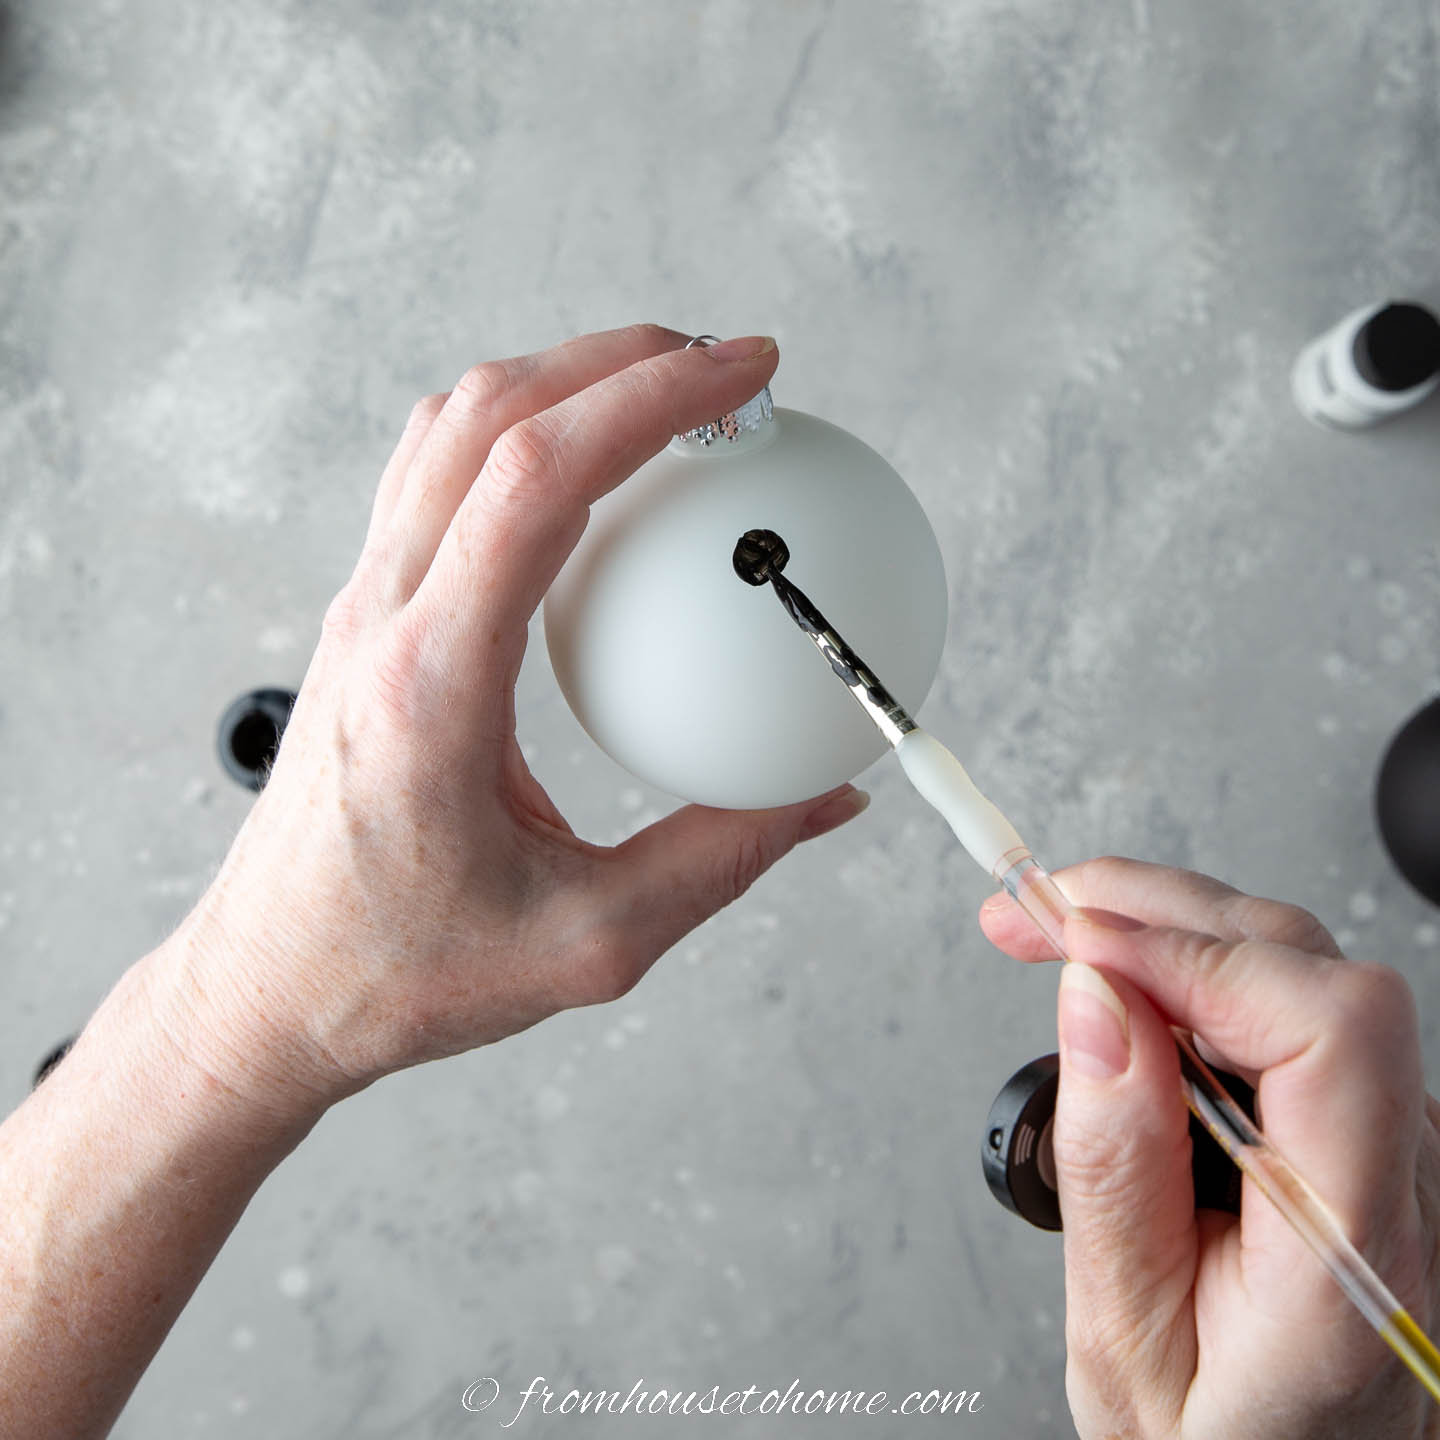 A black polka dot being painted on a white ball ornament